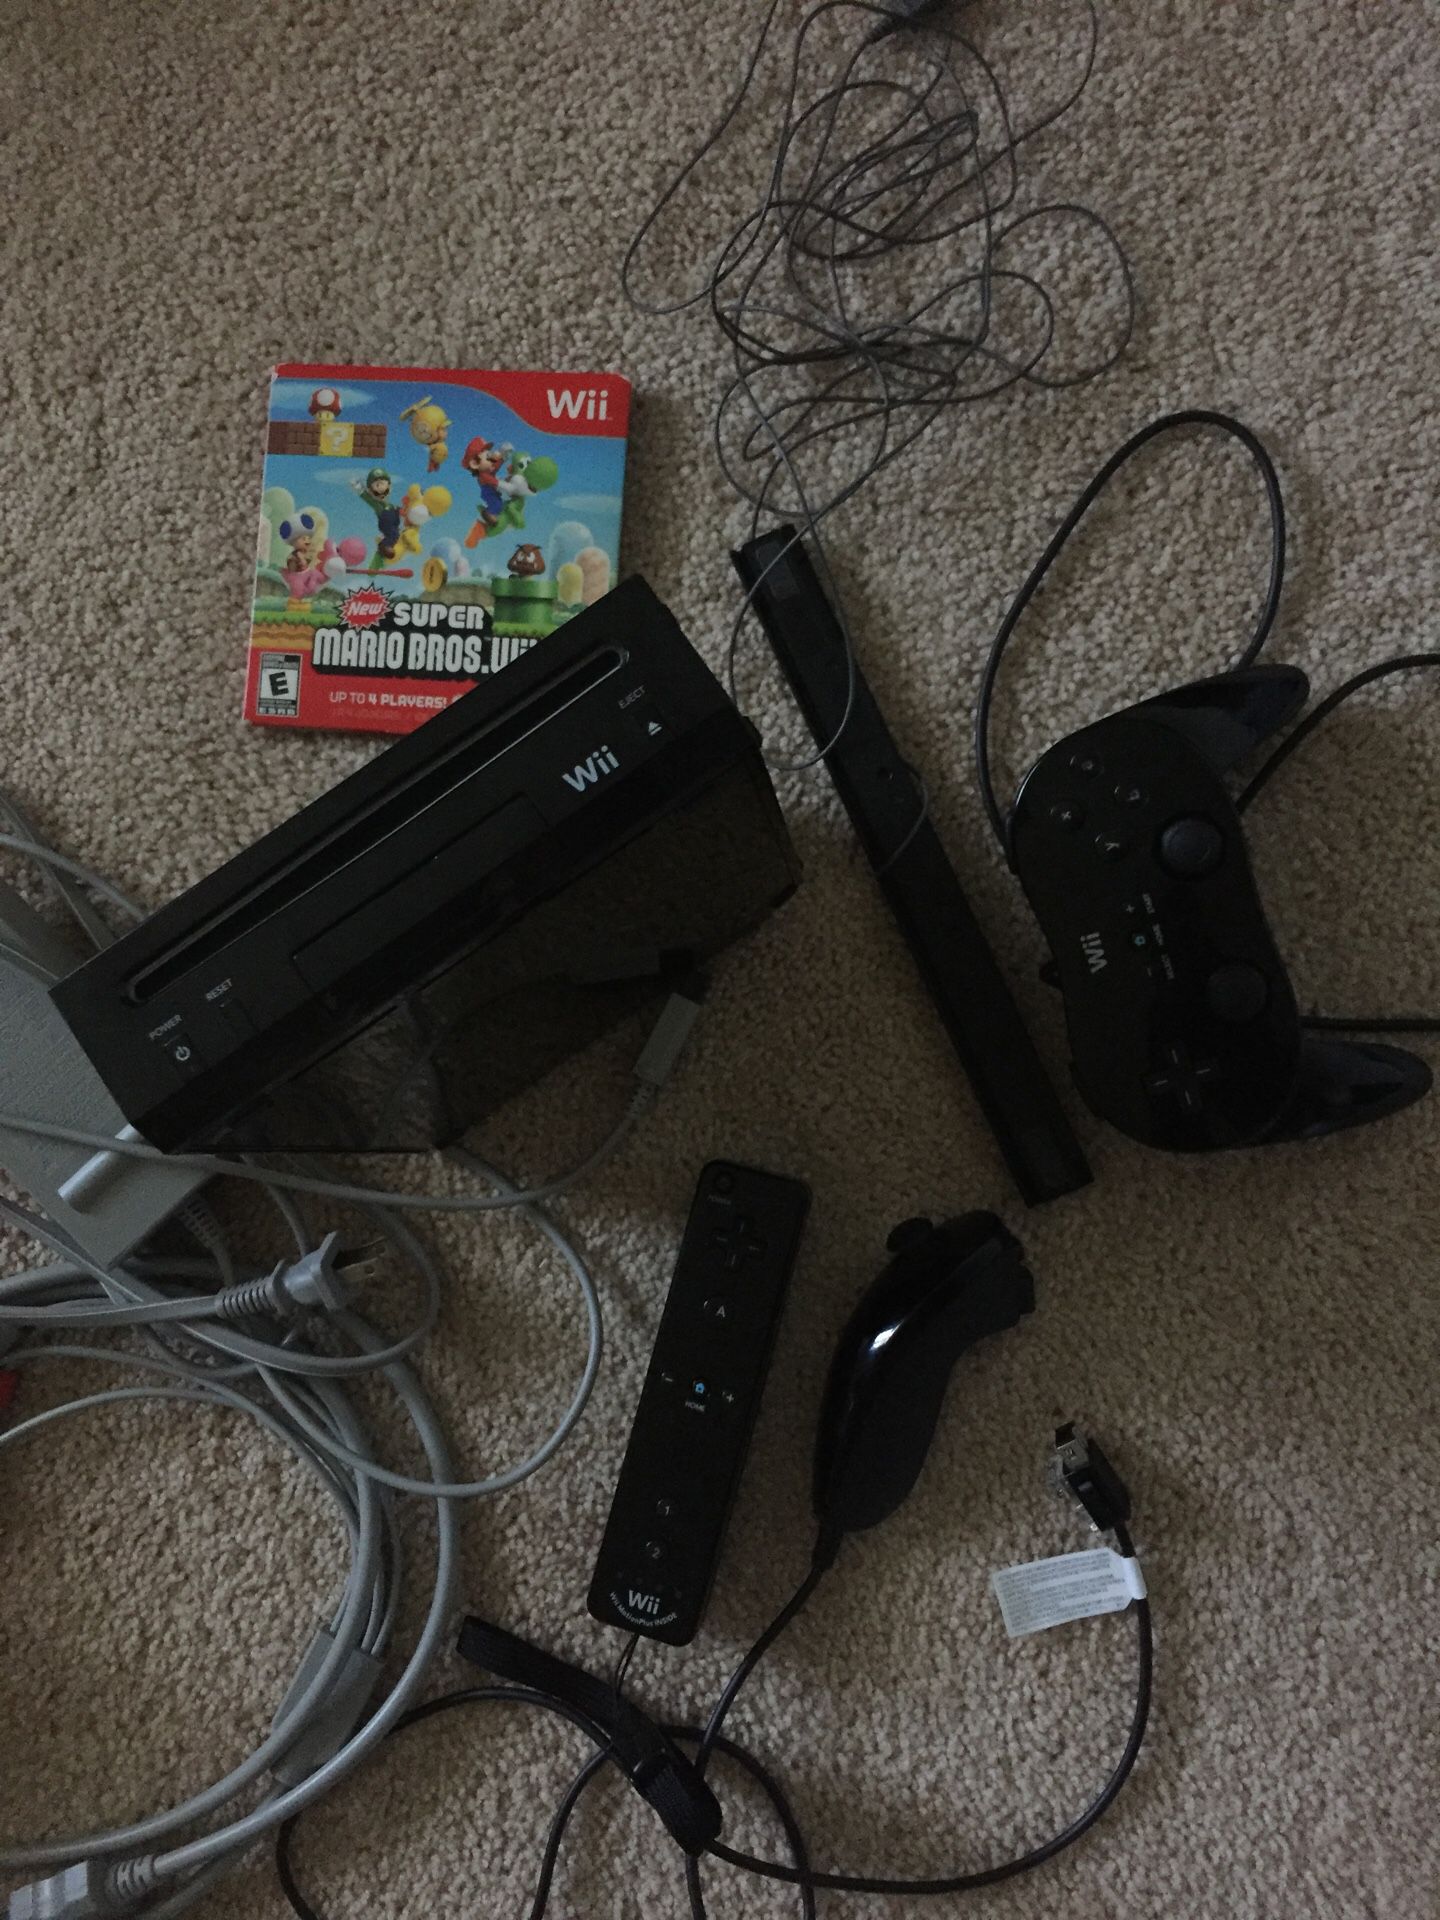 Wii for 50